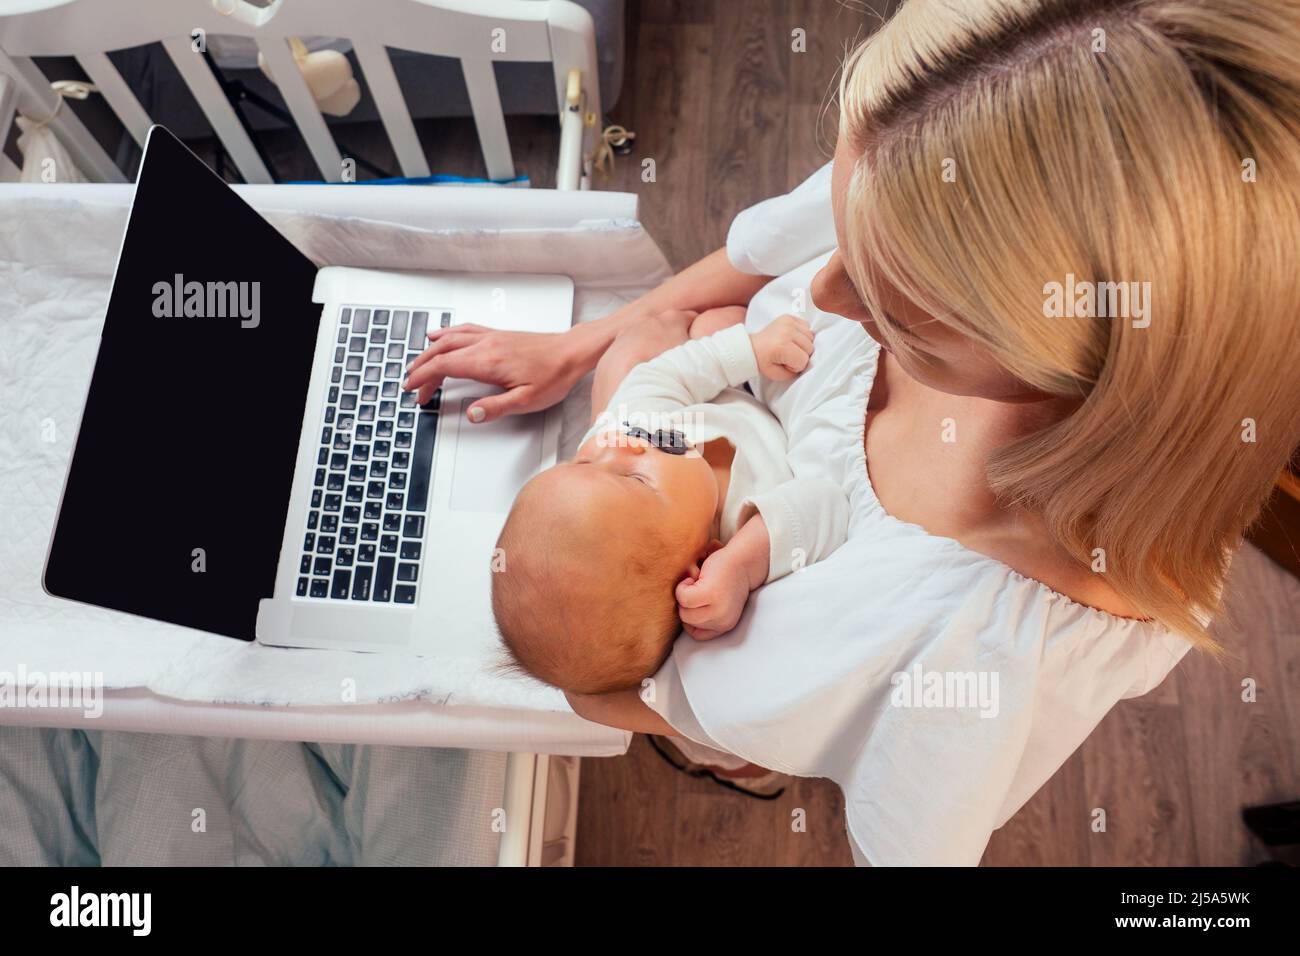 Happy single blonde mother working online and taking care of her baby surfing question on the internet Stock Photo